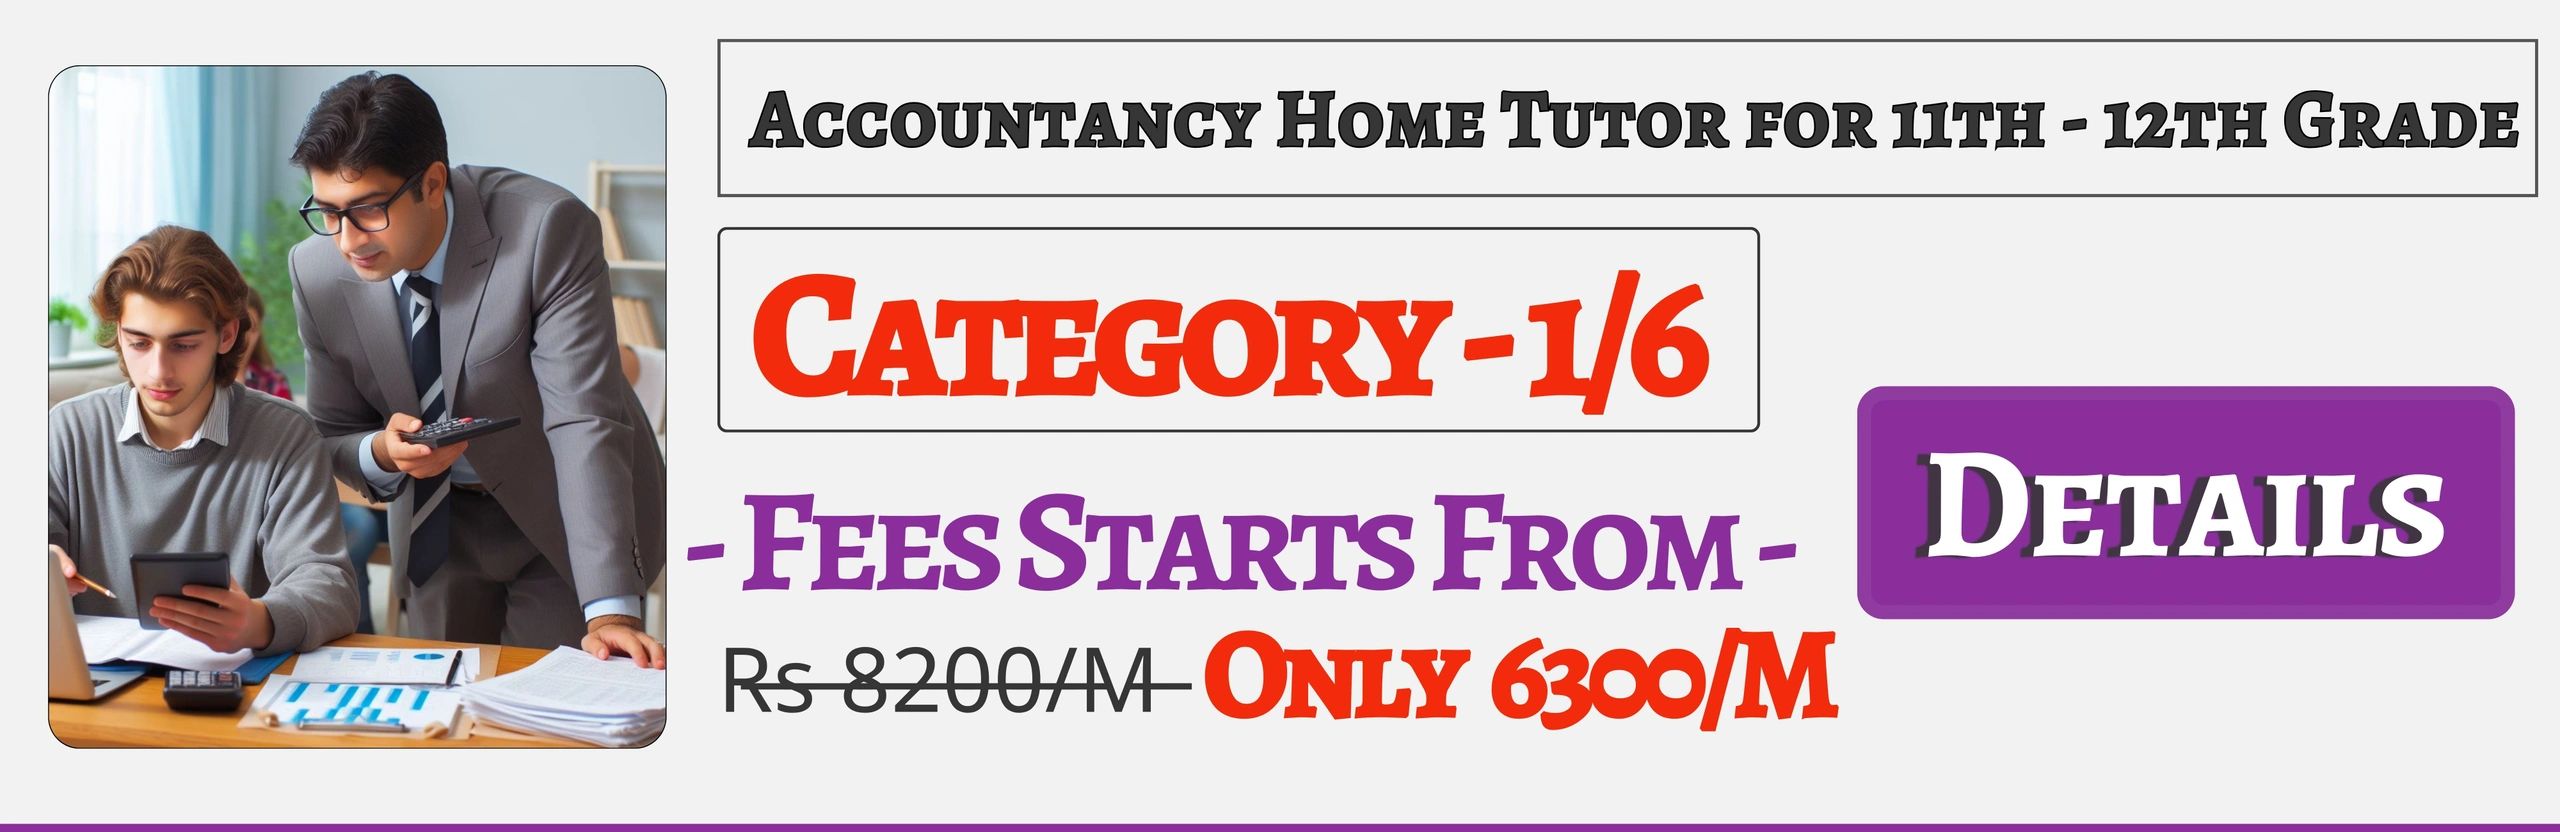 Book Best Nearby Accountancy Home Tuition Tutors For 11th & 12th Jaipur ,Fees Only 6300/M